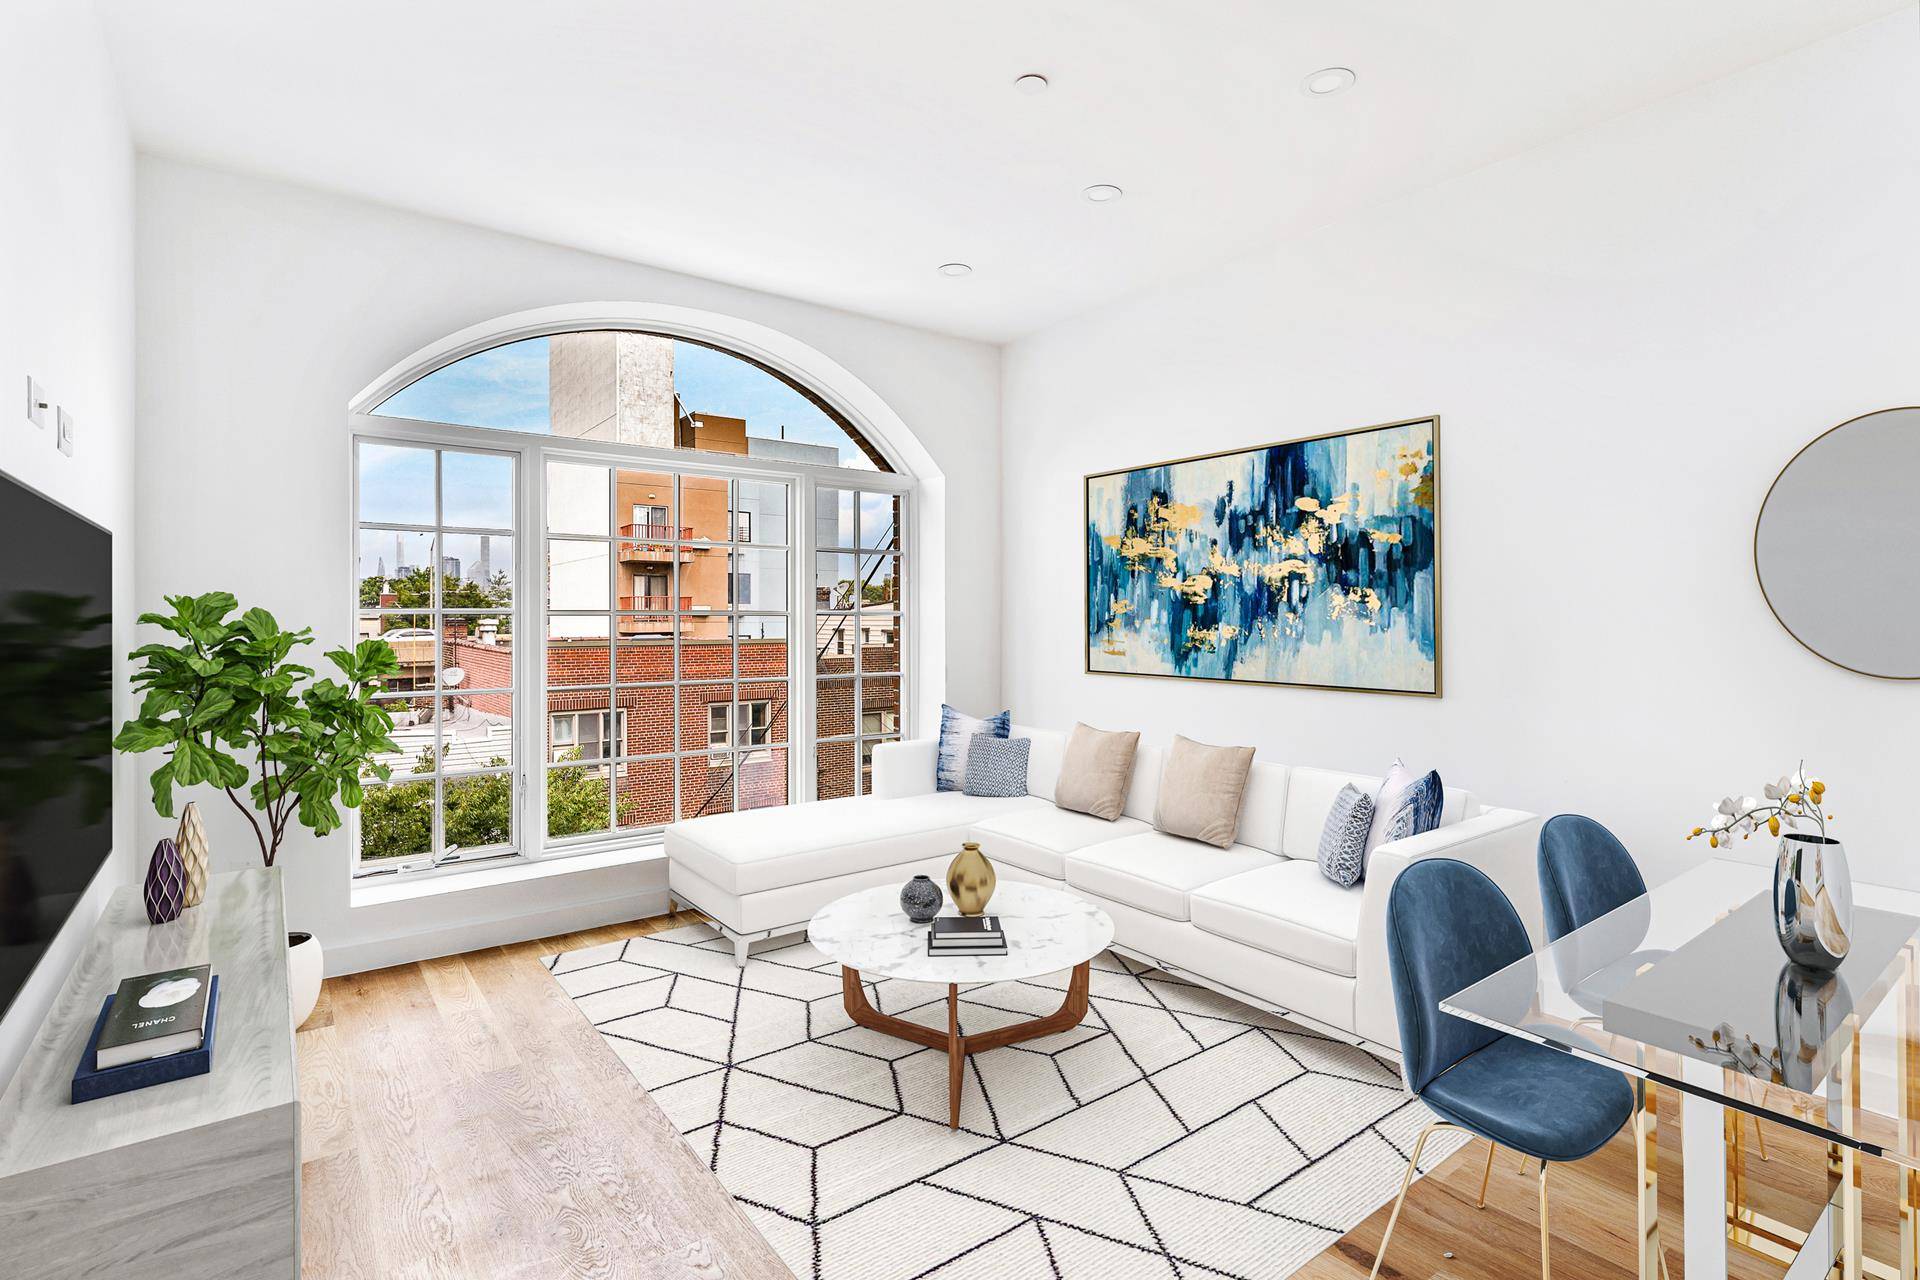 Welcome to 52 Herbert ! A boutique condominium perfectly positioned on the Williamsburg Greenpoint border, close to everything Williamsburg and Greenpoint have to offer while tranquilly abounds on this picturesque, ...